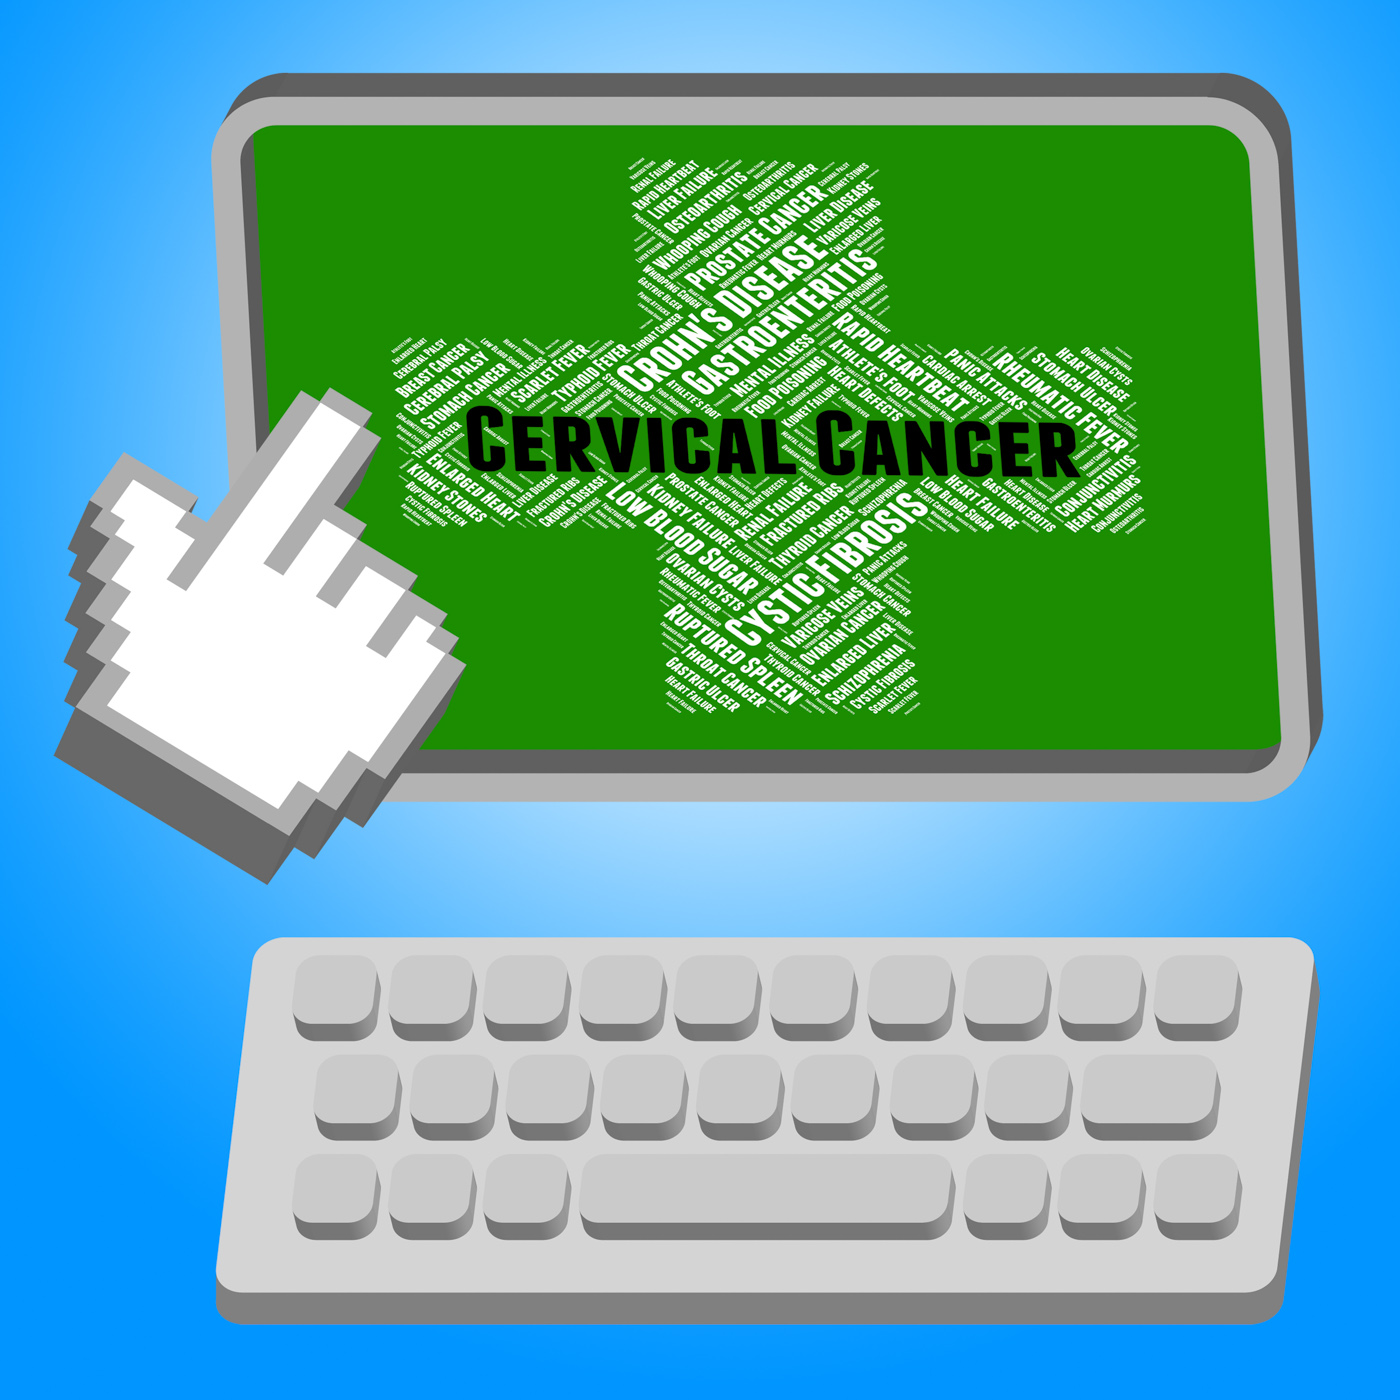 Cervical cancer represents cancerous growth and afflictions photo